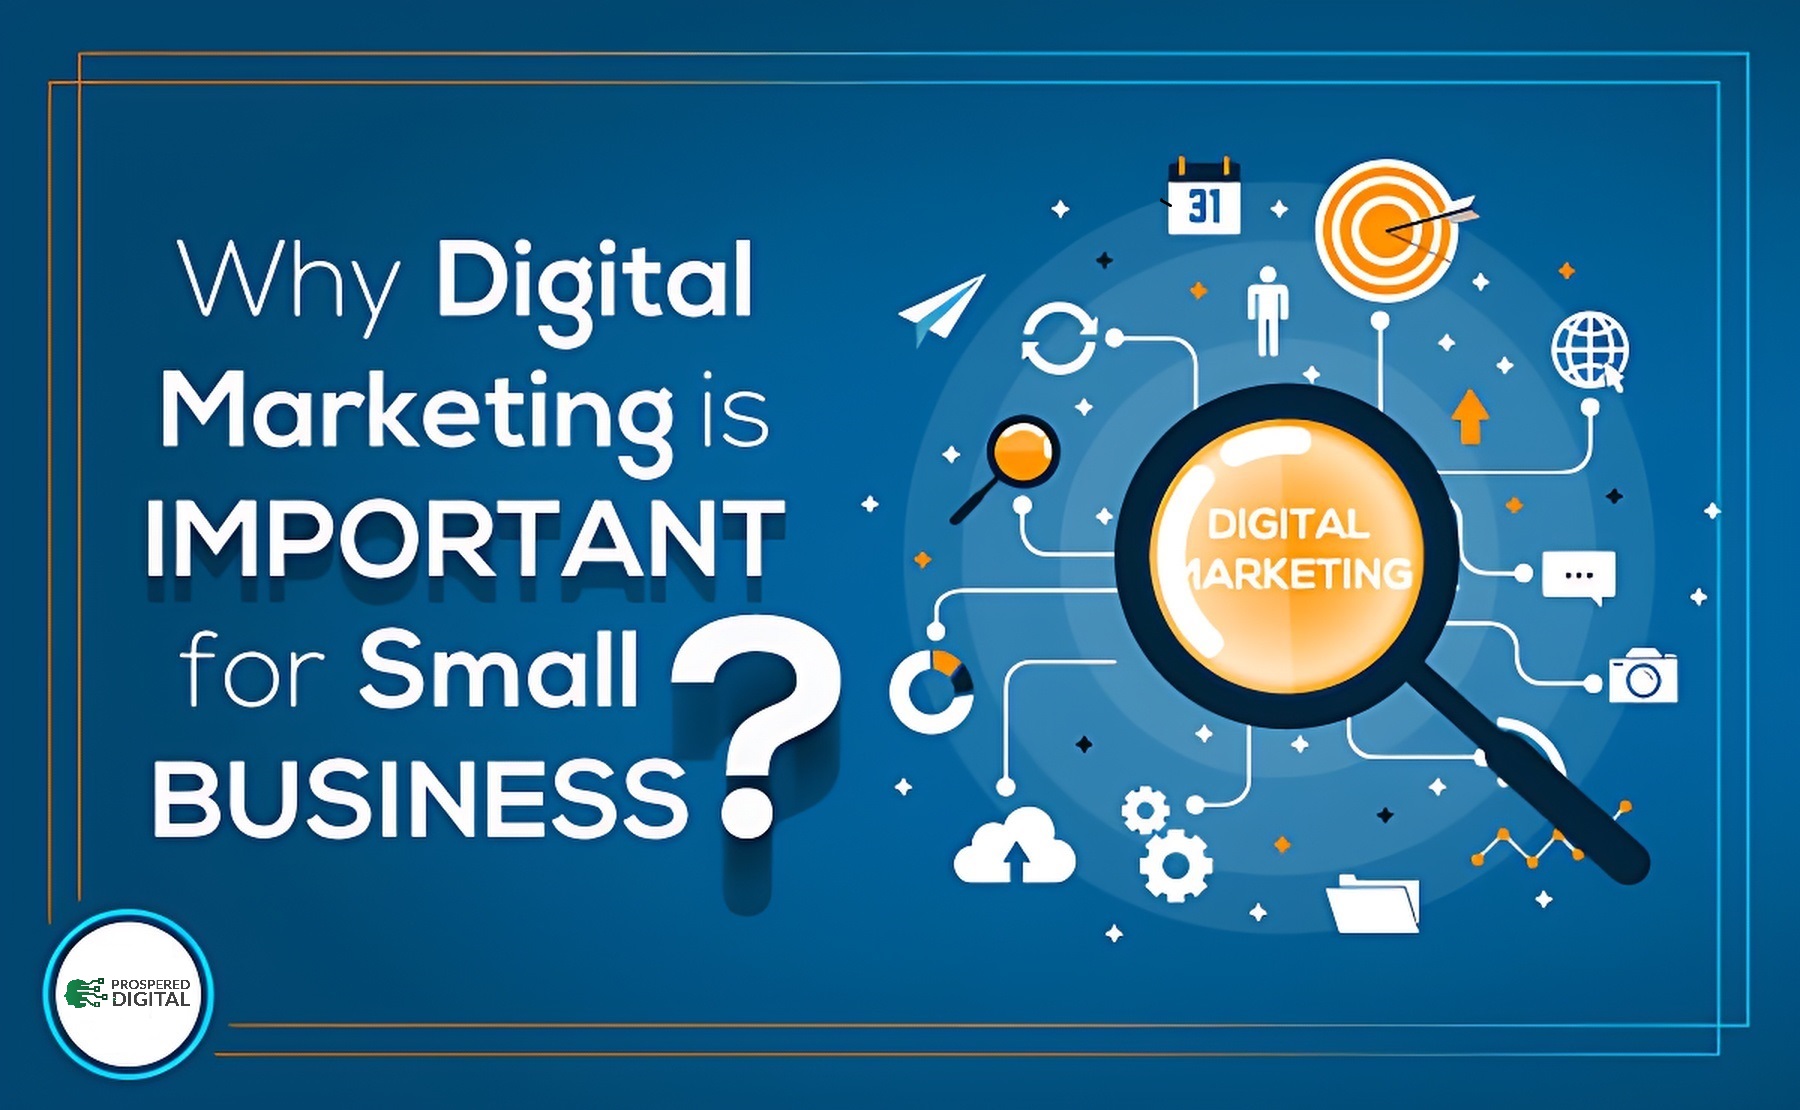 This image showing why digital marketing is important for small business in white text colour with blue background and also showing different icons